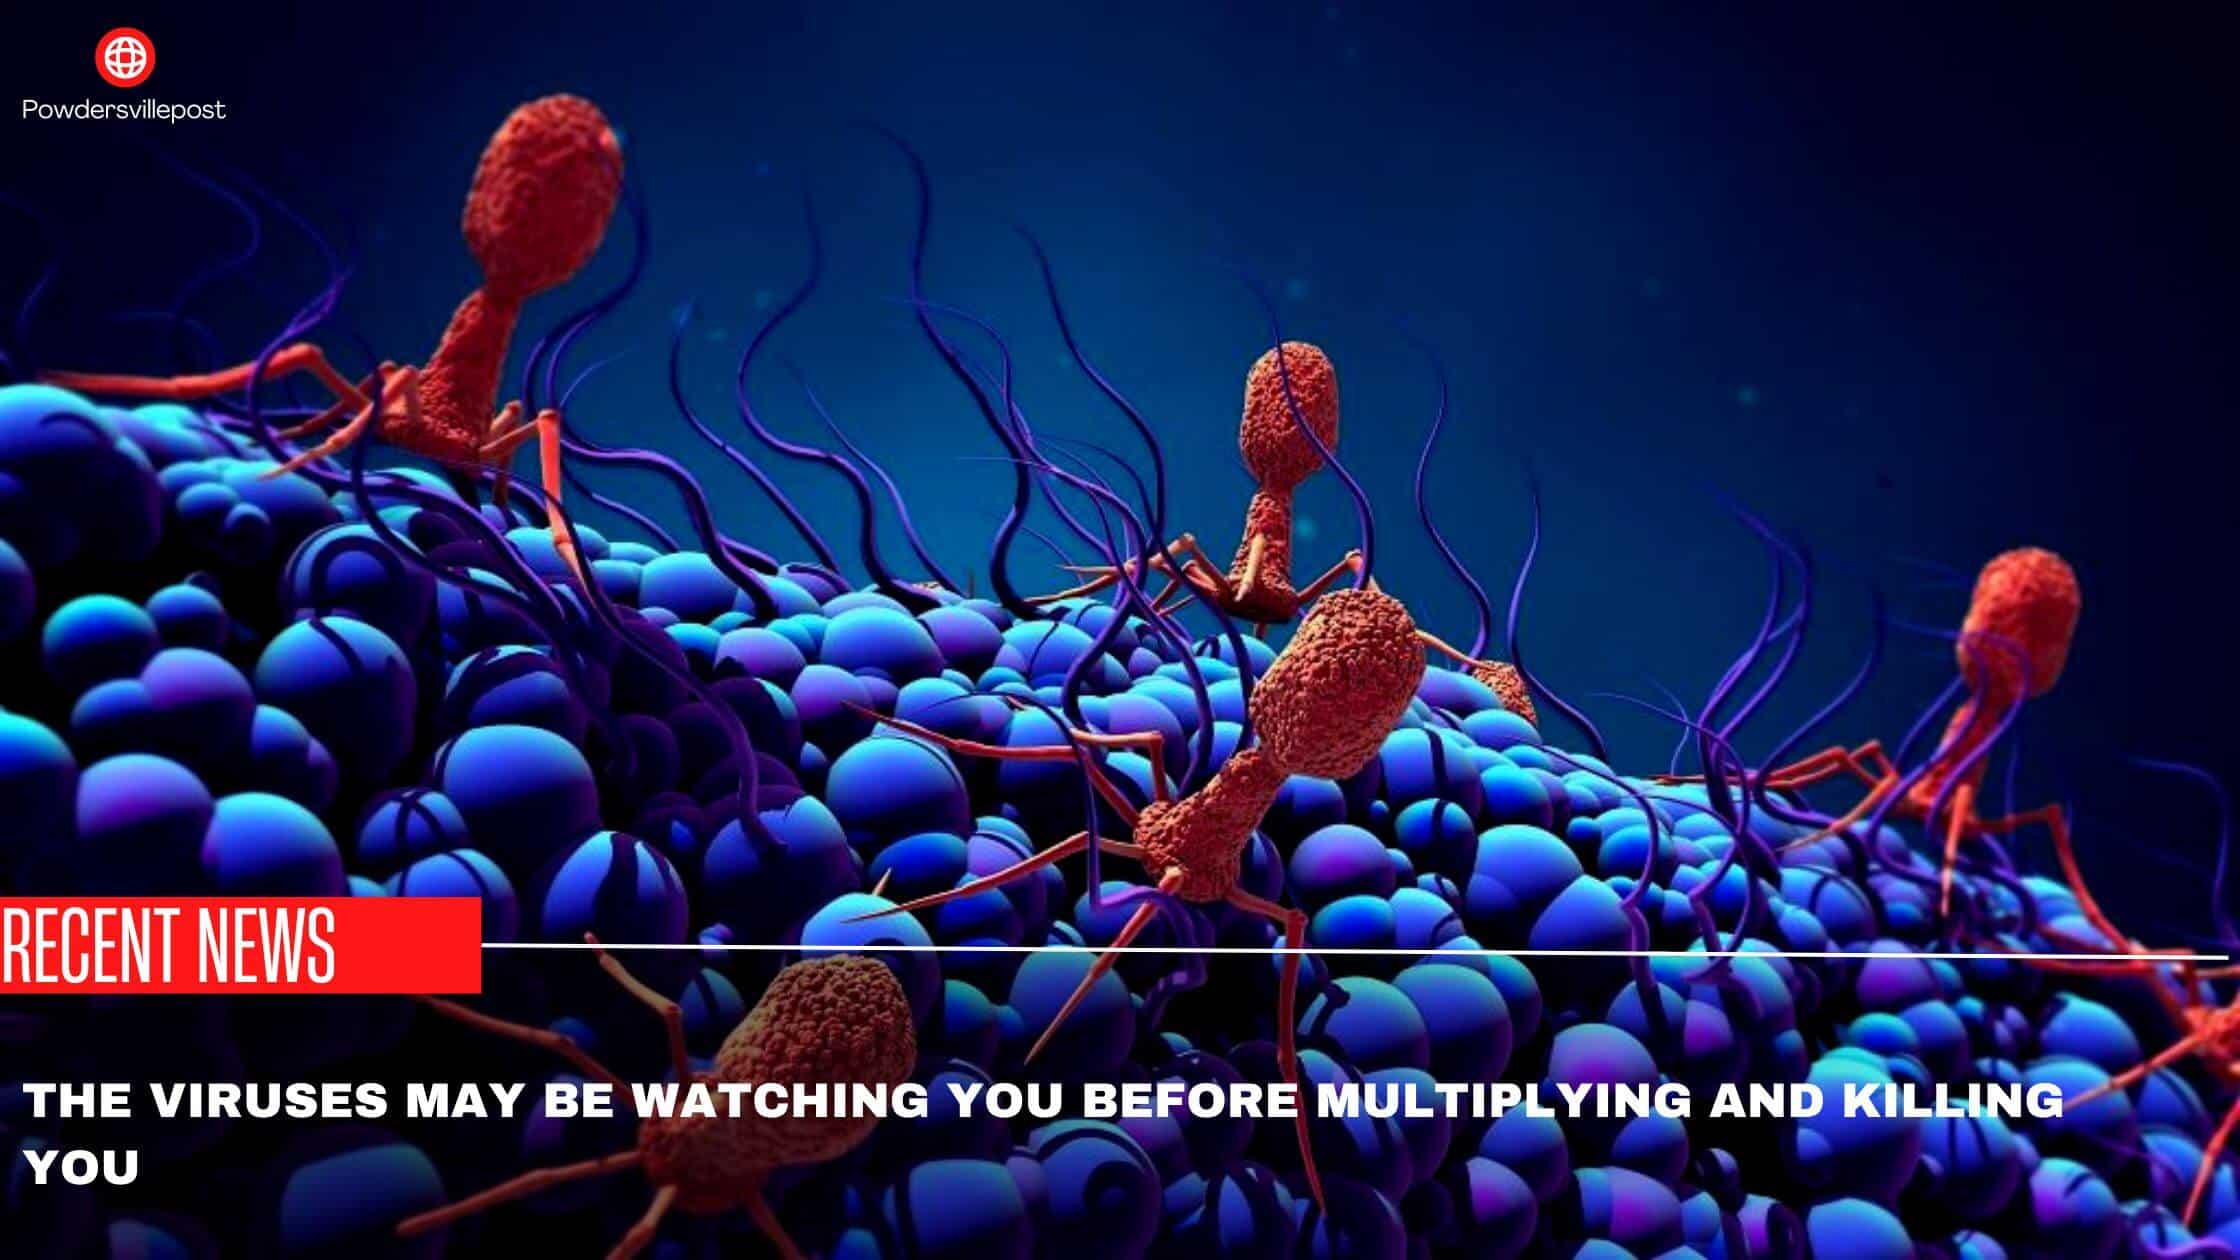 The Viruses May Be Watching You Before Multiplying And Killing You